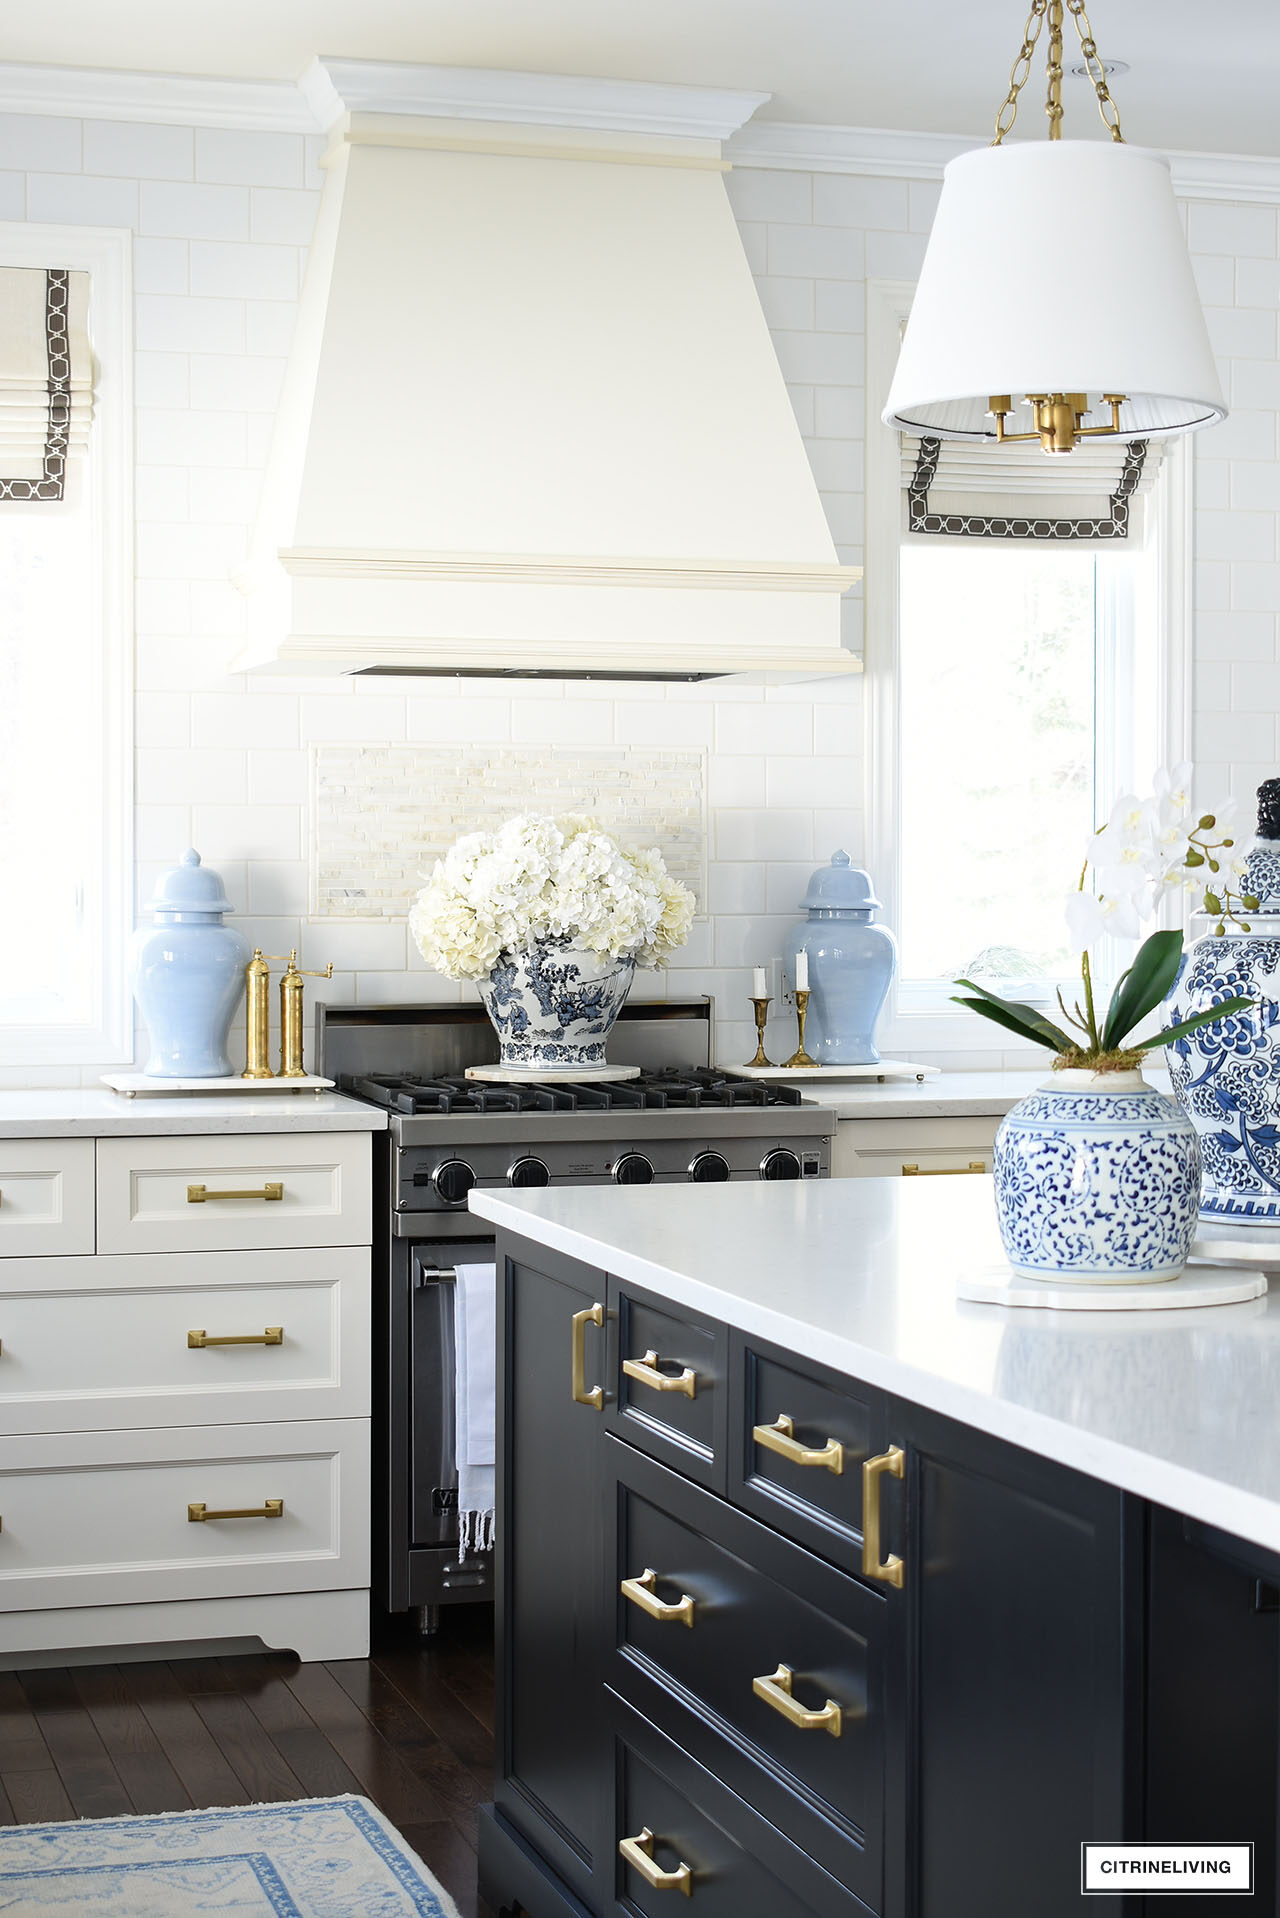 Elegant kitchen decorated for spring with blue and white ginger jars and an elegant orchid arrangement, light blue ginger jars flanking the stove with a beautiful large faux hydrangea arrangement on top.